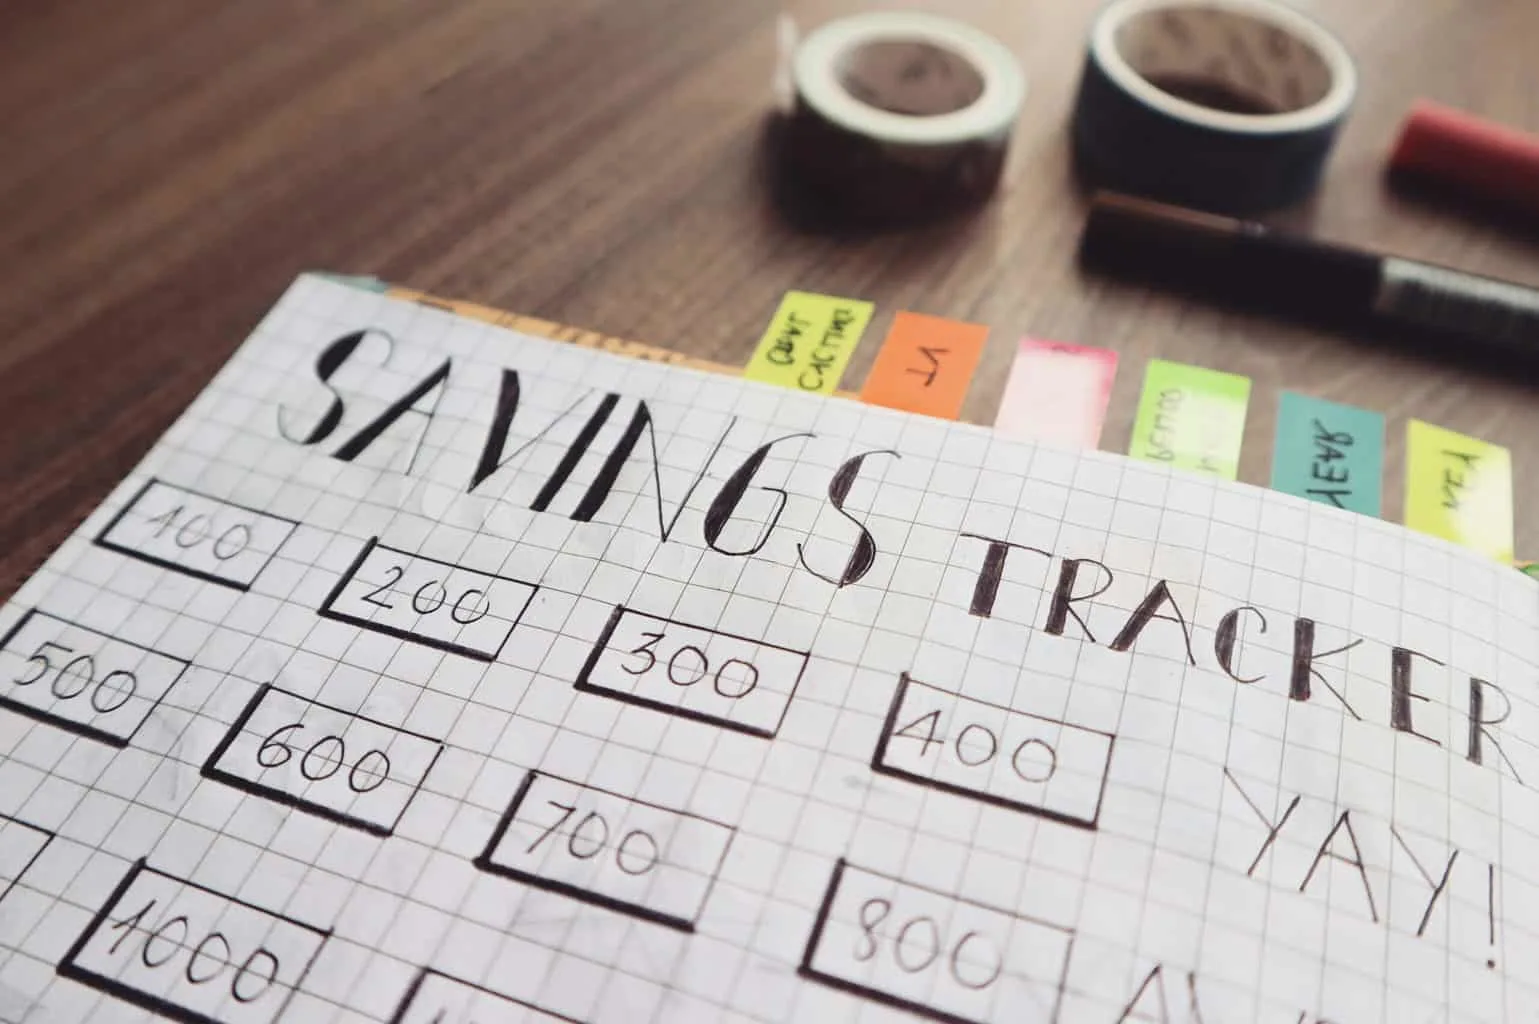 savings tracker spreadsheet on graph paper. Follow these tips for saving money in 2020